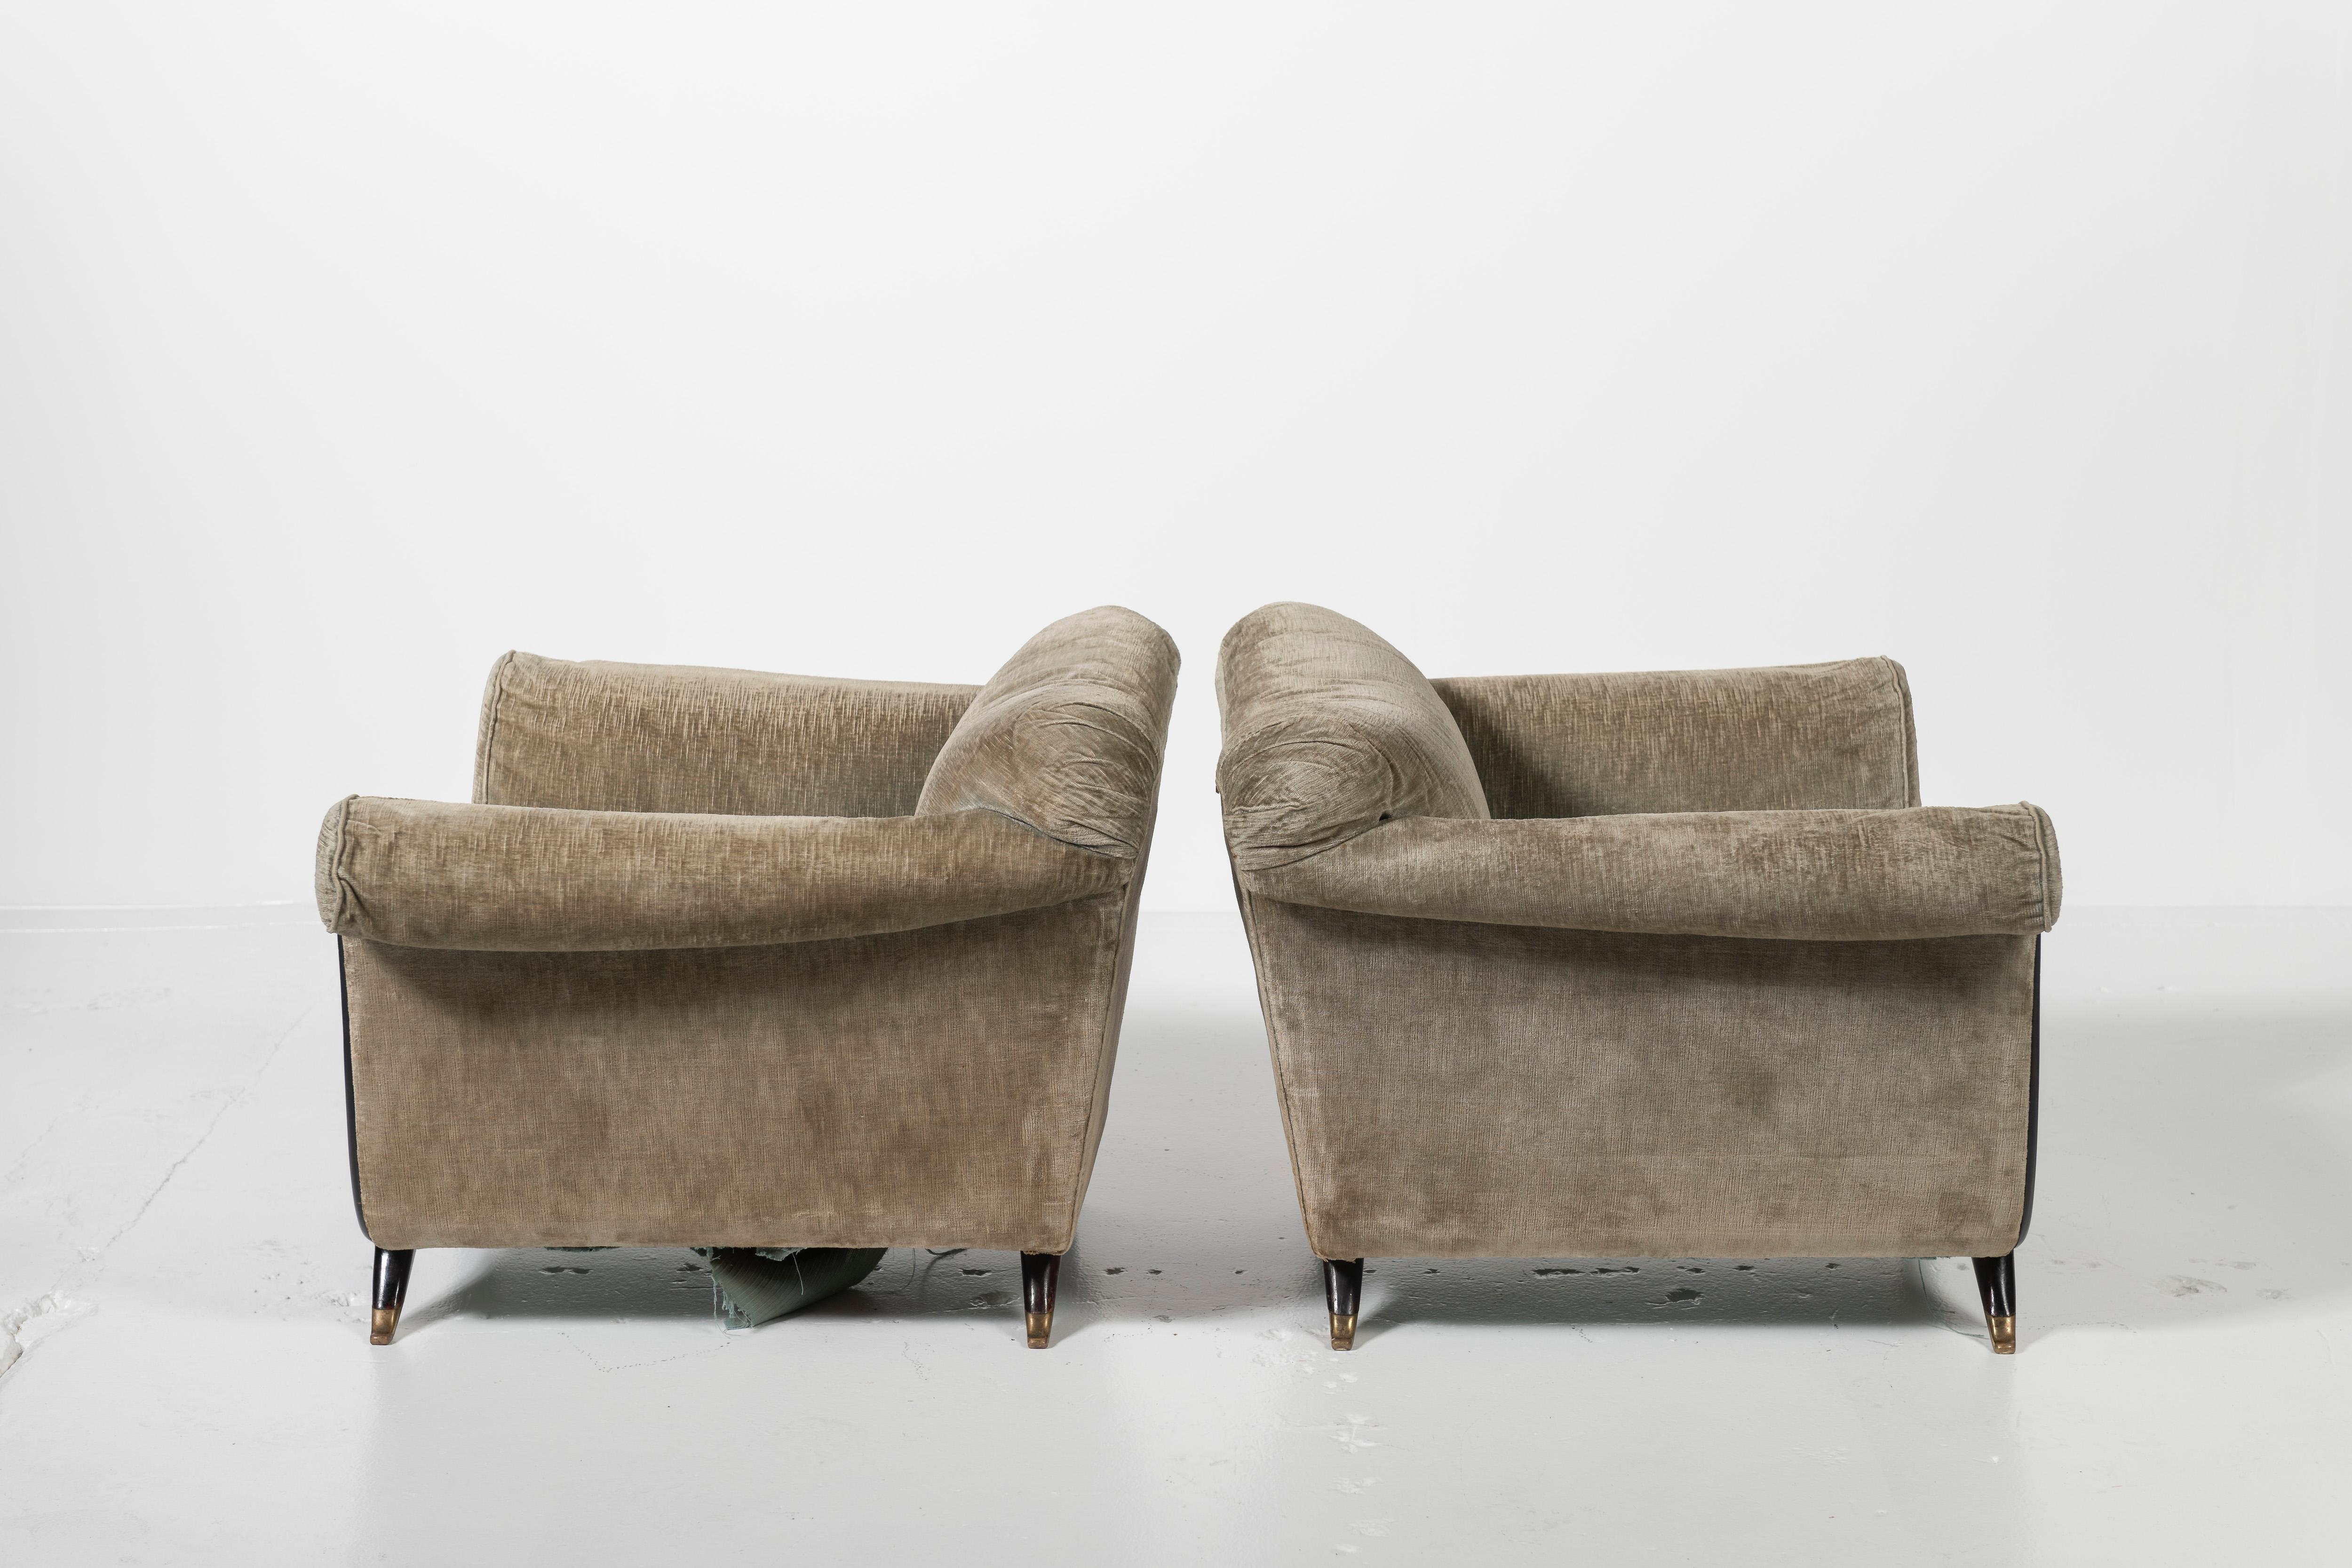 Upholstery 1940s Italian Armchairs Attributed to Guglielmo Ulrich